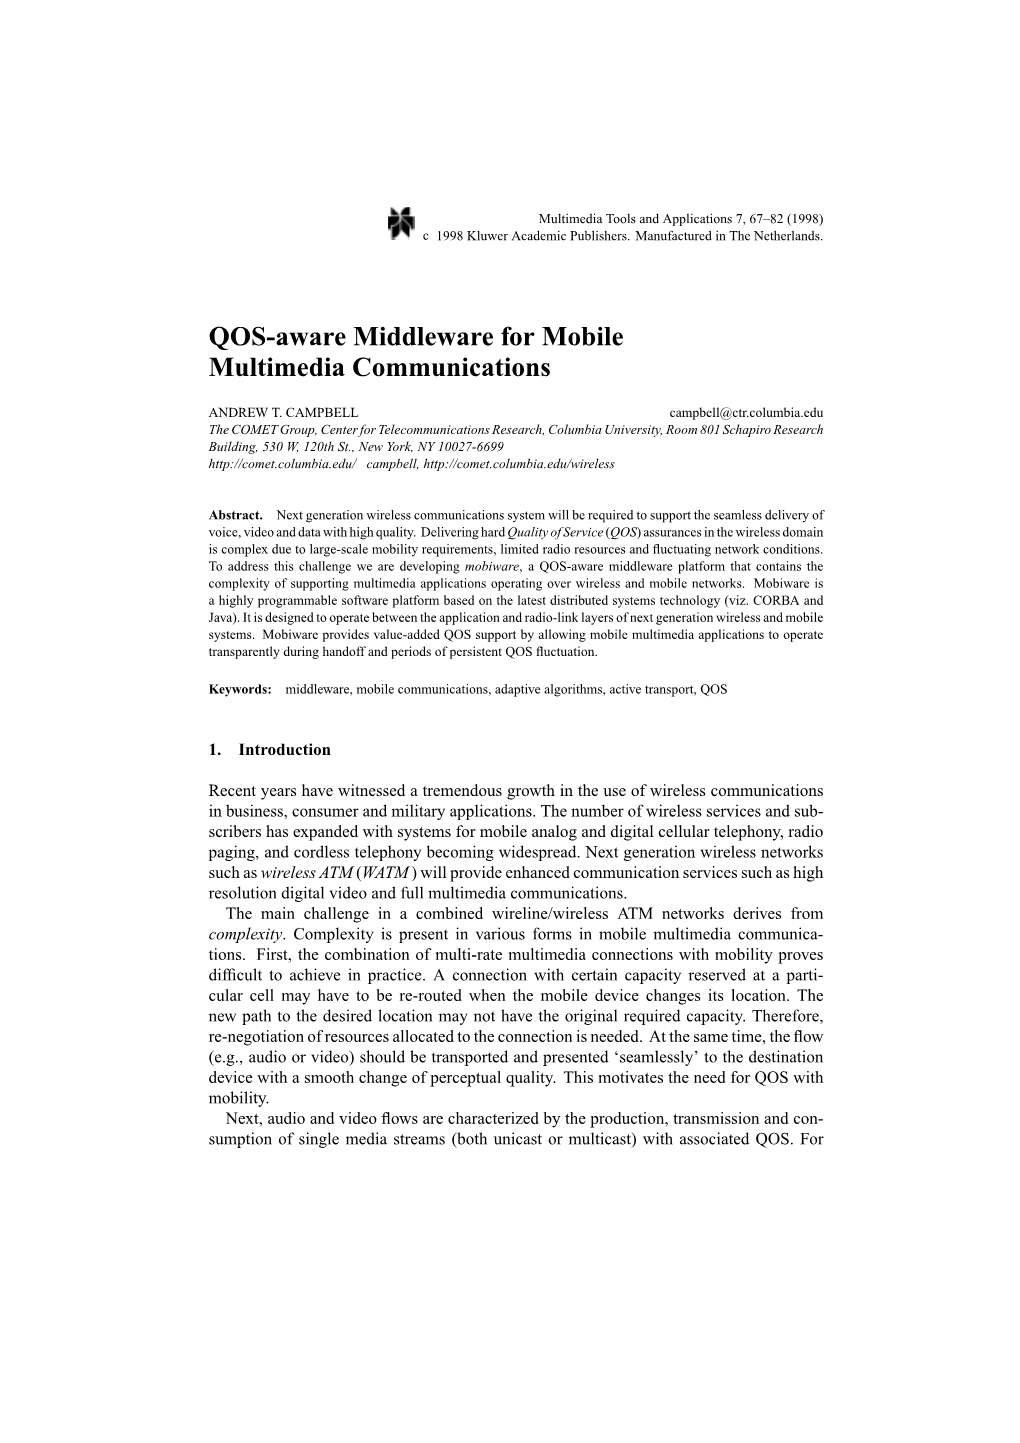 QOS-Aware Middleware for Mobile Multimedia Communications